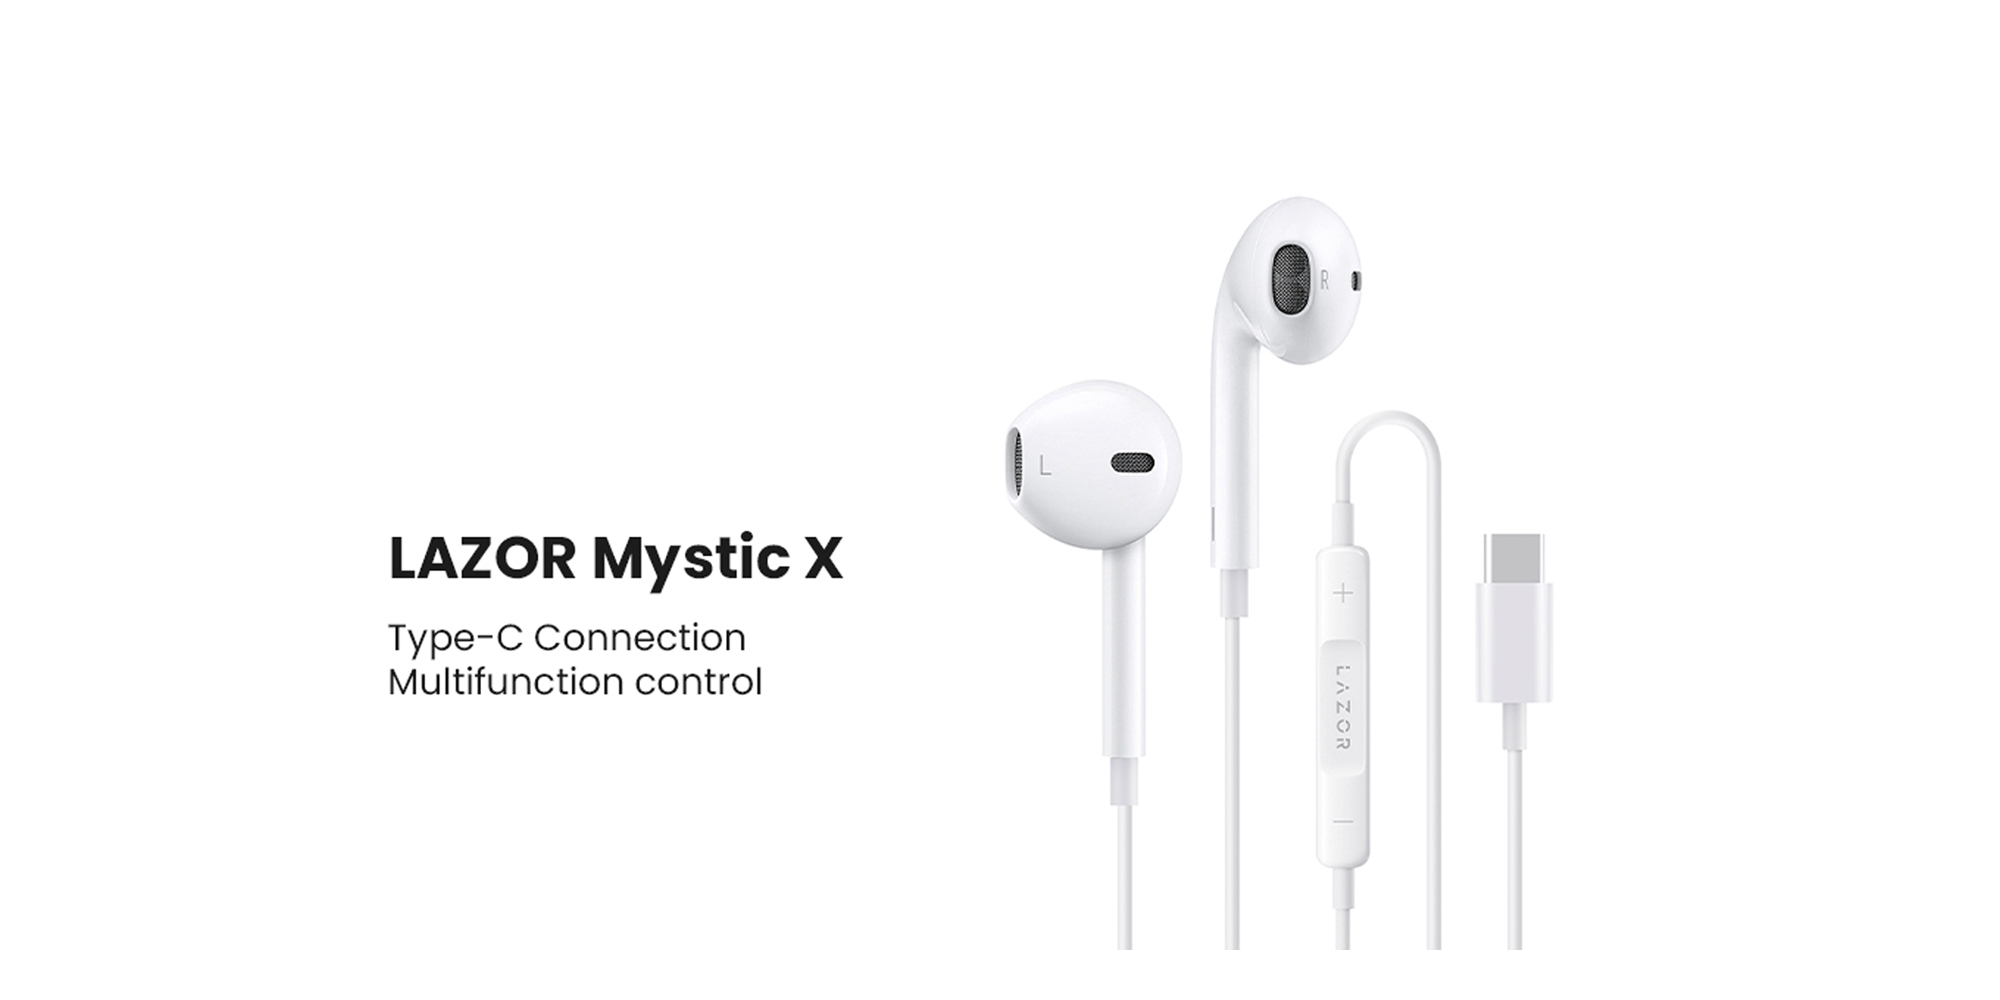 LAZOR MYSTIC X EA130: Type-C Wired Headphones with Microphone, HiFi Stereo Sound, In-Line Control, Soft PVC with Audio Digital Decoding IC, Multifunction Button - White, 1.2M